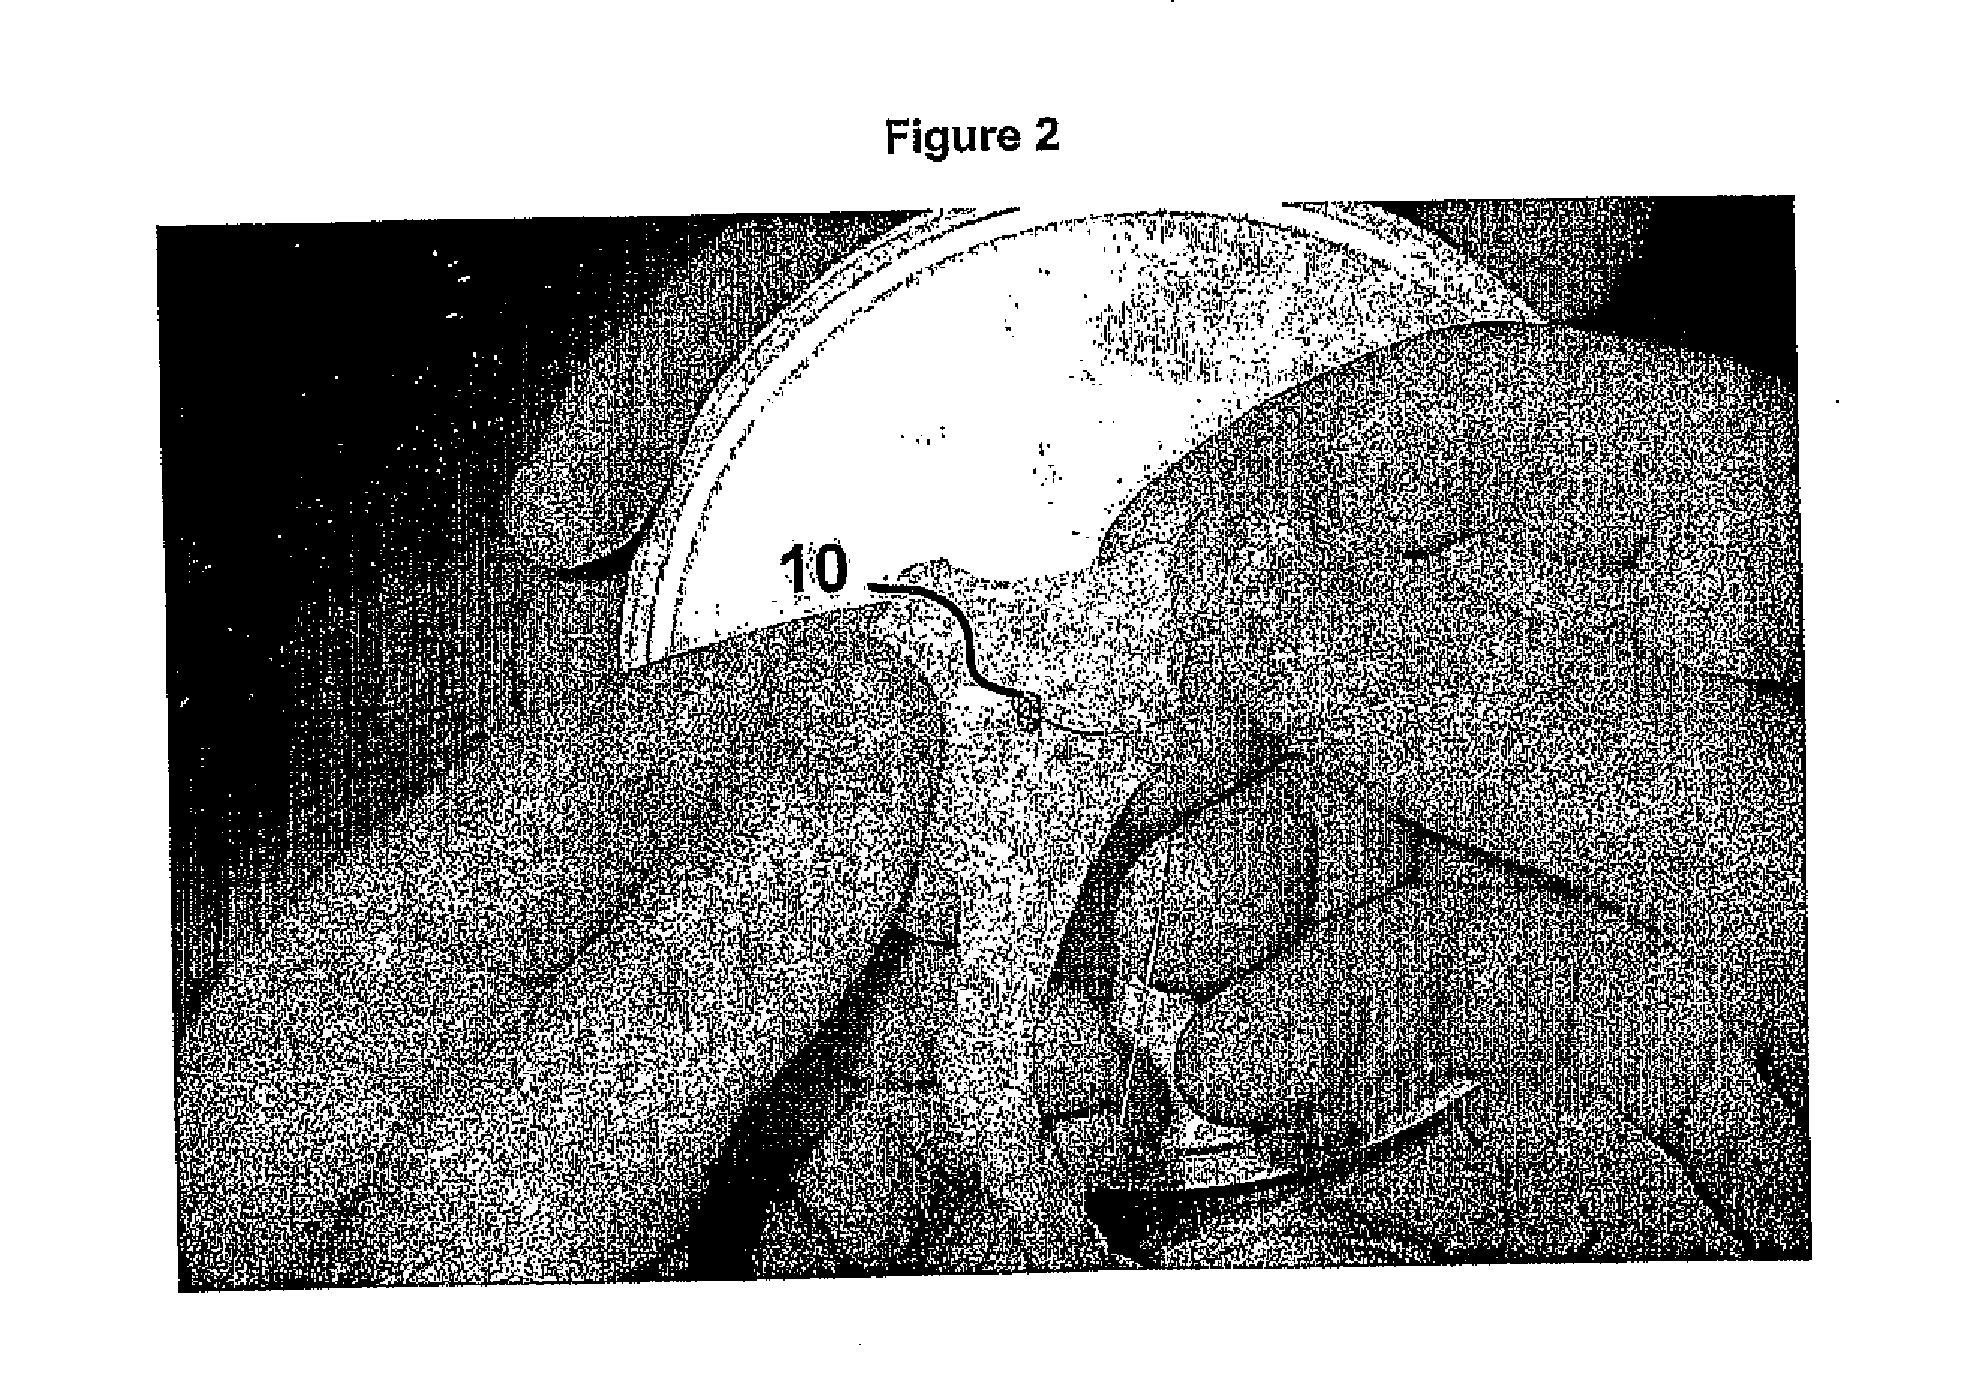 Method and device for the controlled delivery and placement of securing elements in a body